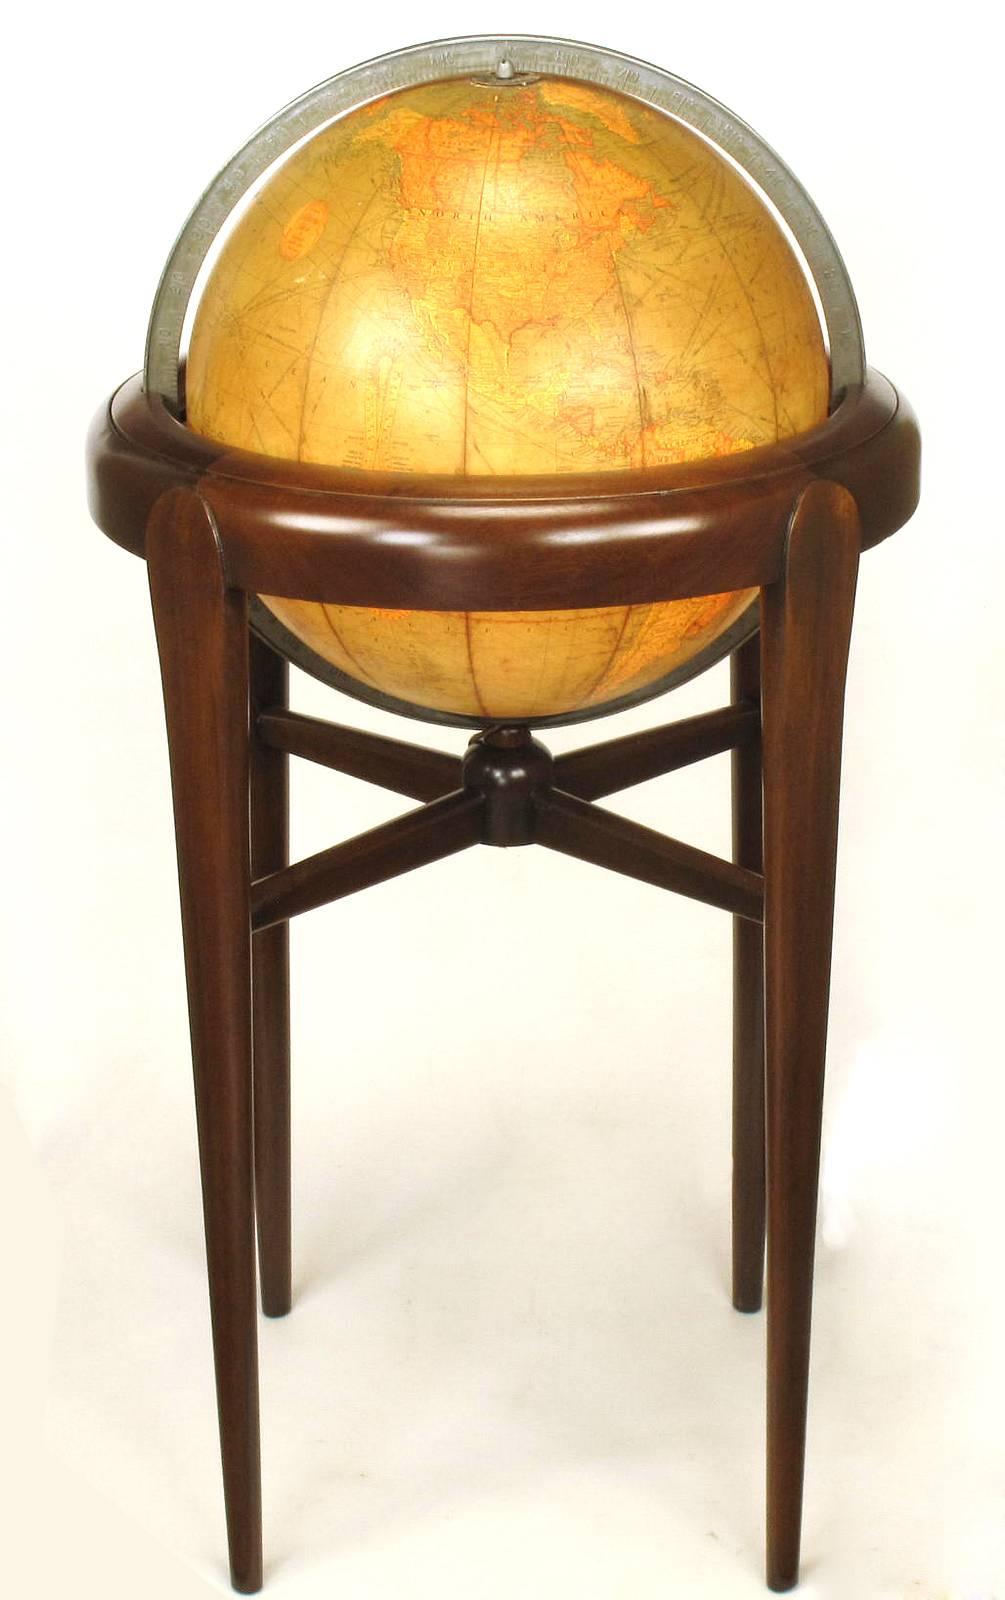 Excellent 1940s Replogle paper covered glass globe on mahogany Stand. The Stand is articulated 90 degrees side to side and 360 degrees around. The stand has been restored while the globe is left with it's original patina. A pull switch underneath